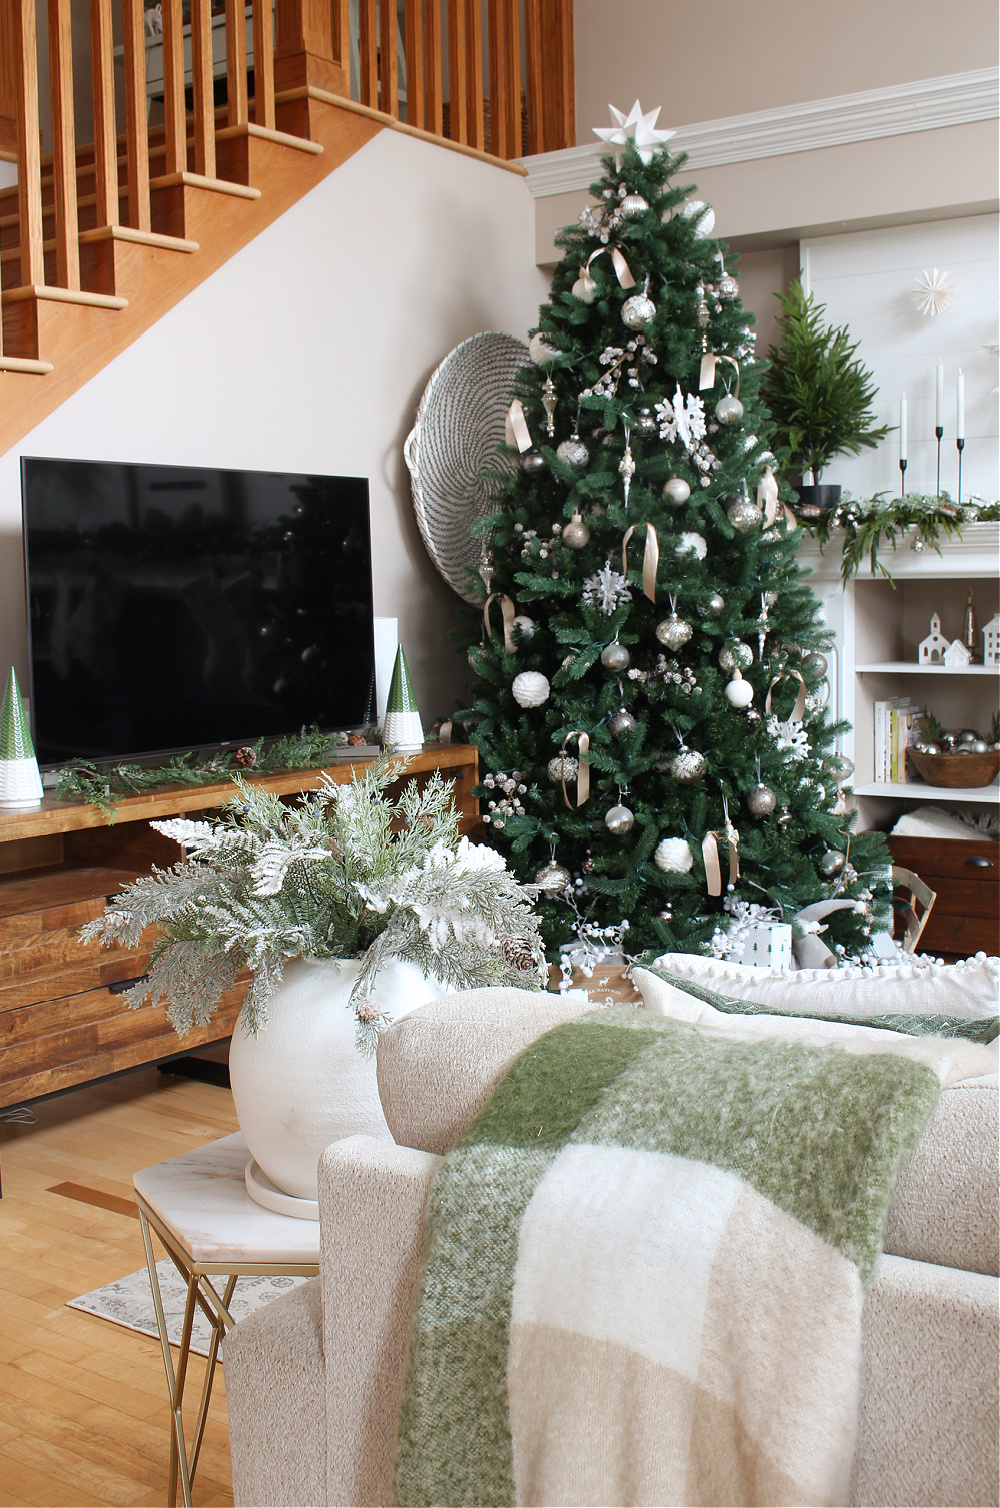 Cozy living room decorated for Christmas with white and green,